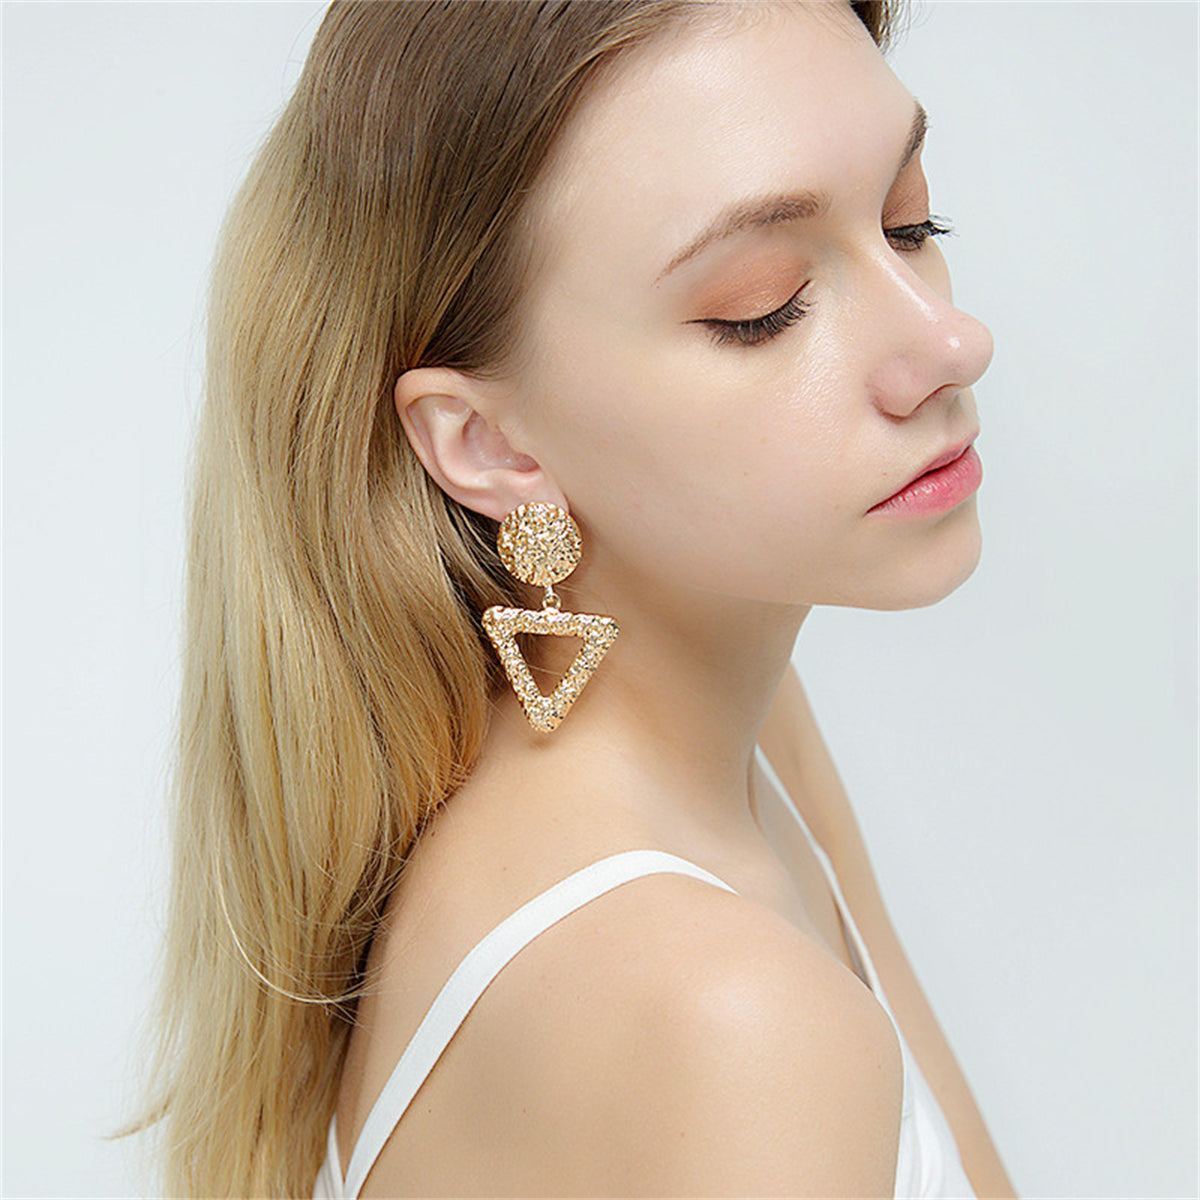 18K Gold-Plated Textured Open Triangle Drop Earrings